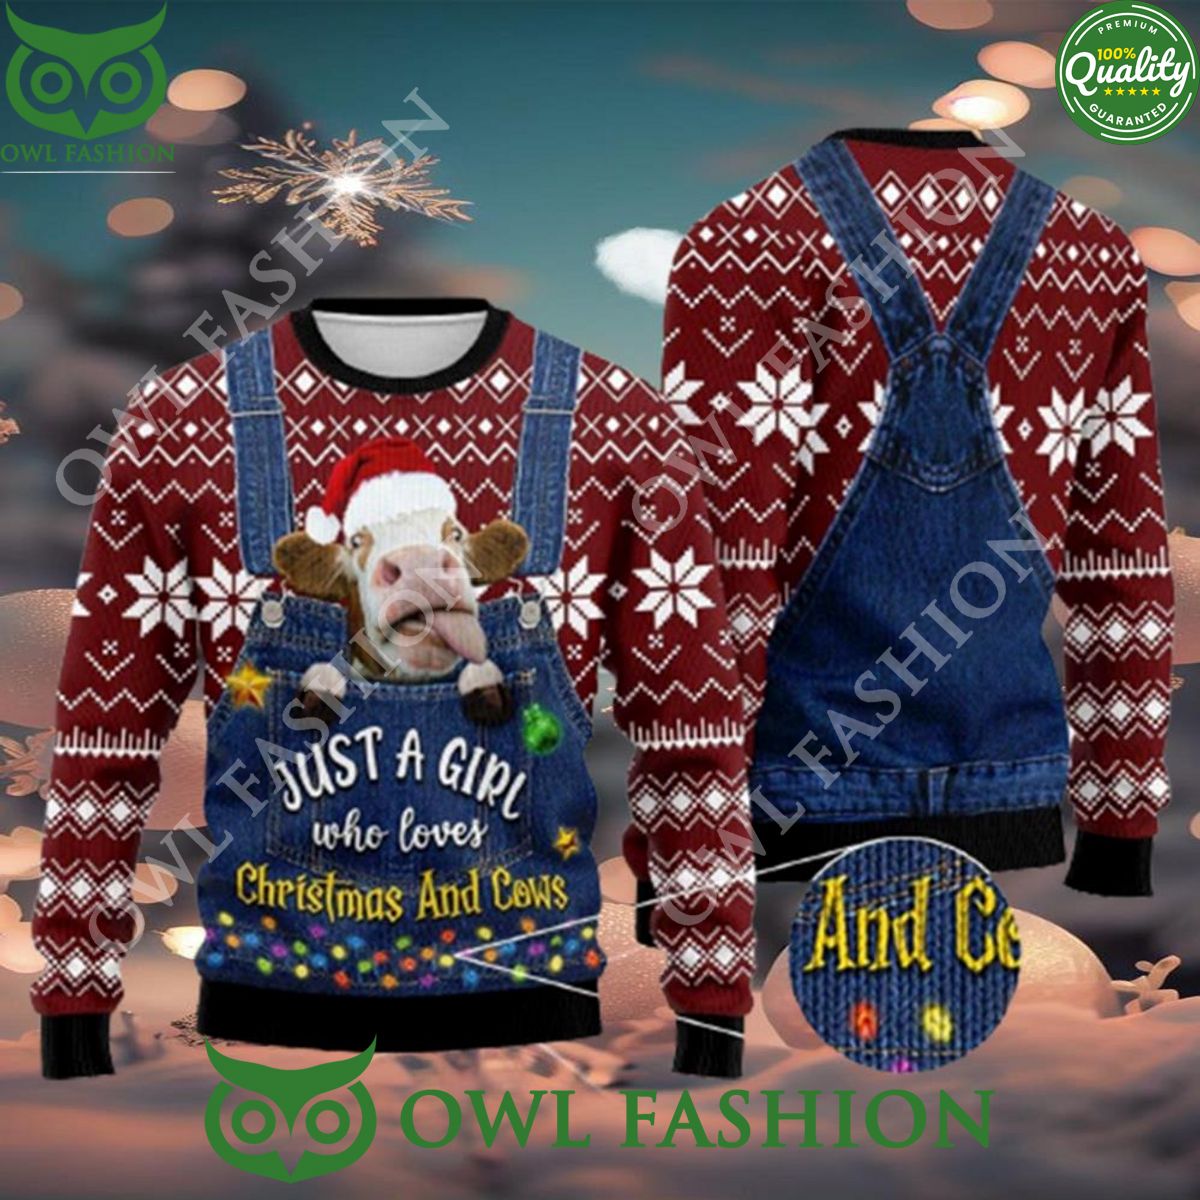 just a girl who loves cow ugly christmas sweater jumper 1 TiyYC.jpg